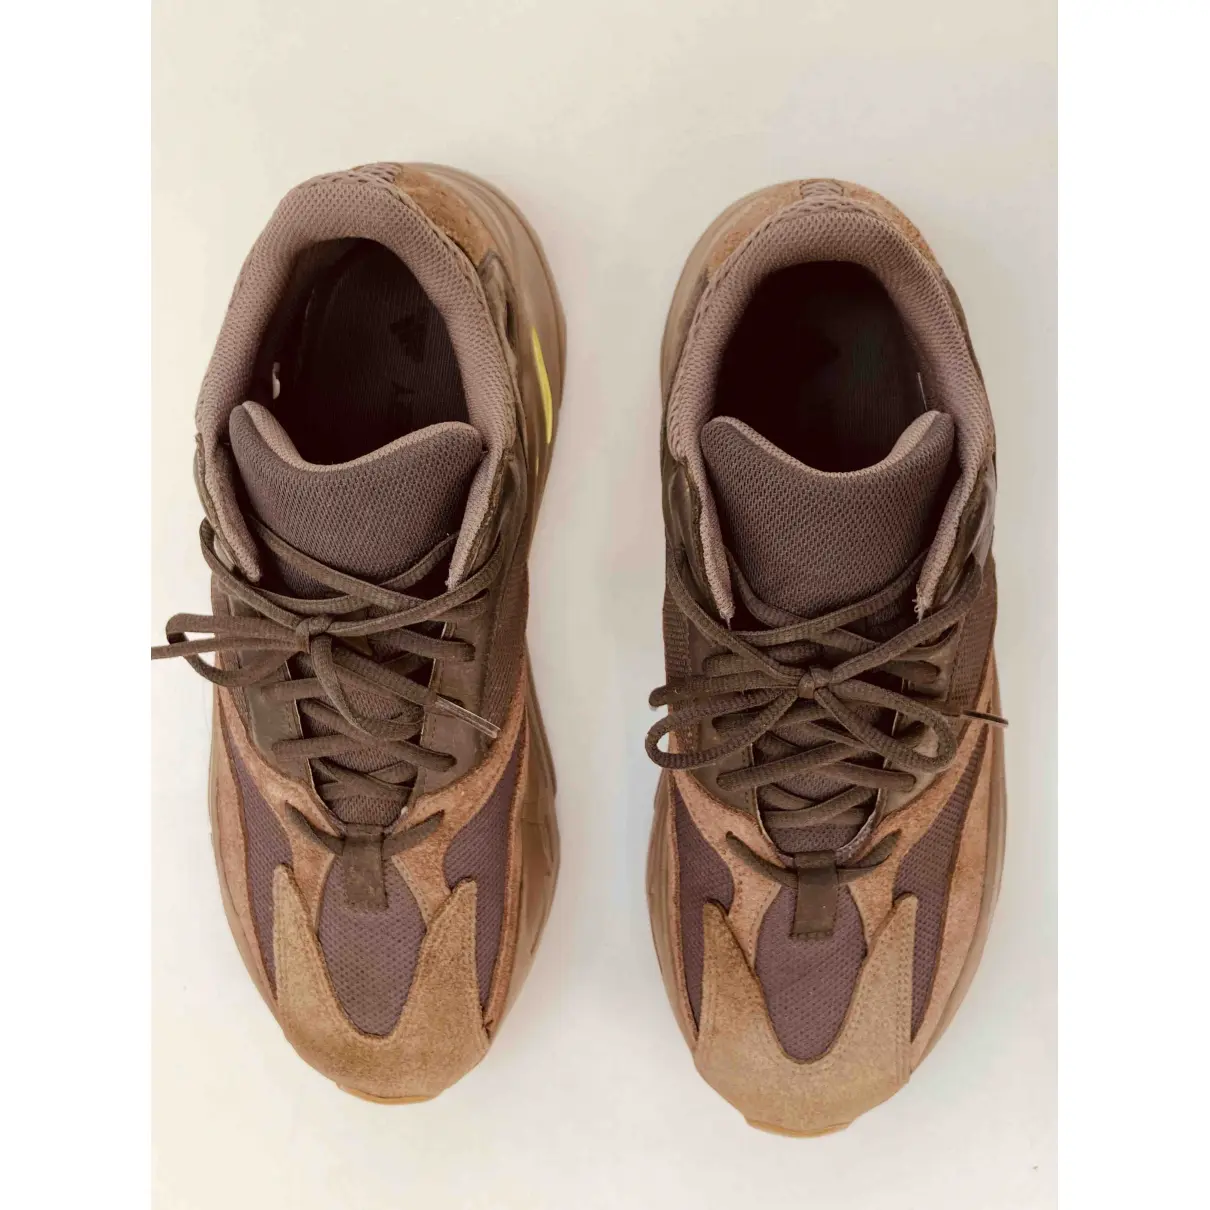 Buy Yeezy x Adidas Boost 700 V2 low trainers online